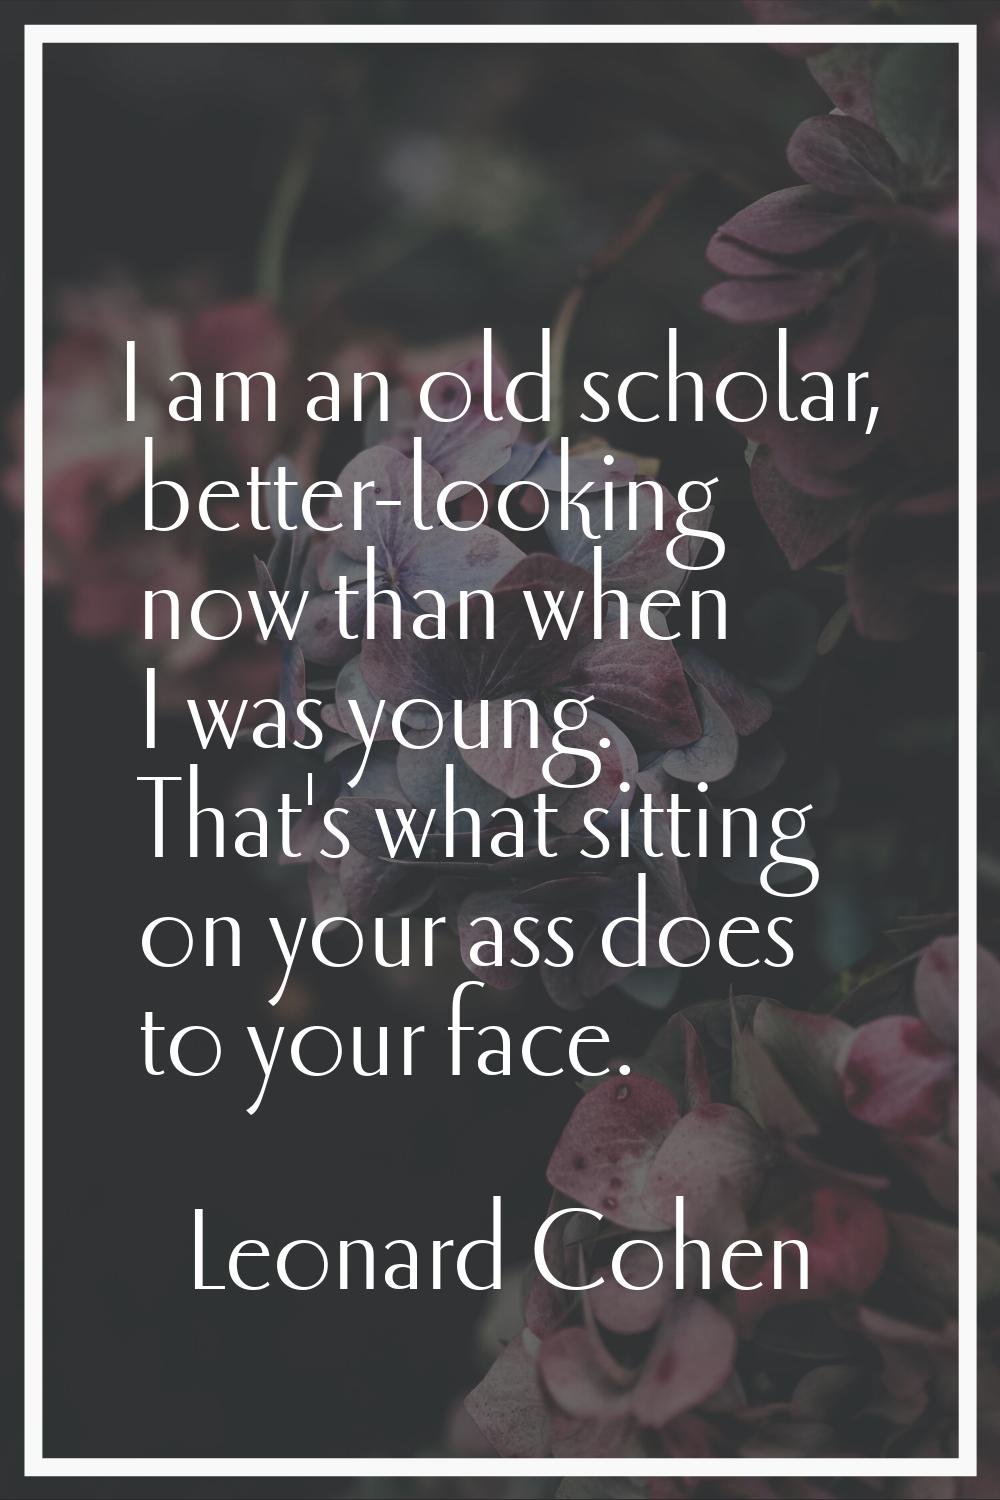 I am an old scholar, better-looking now than when I was young. That's what sitting on your ass does